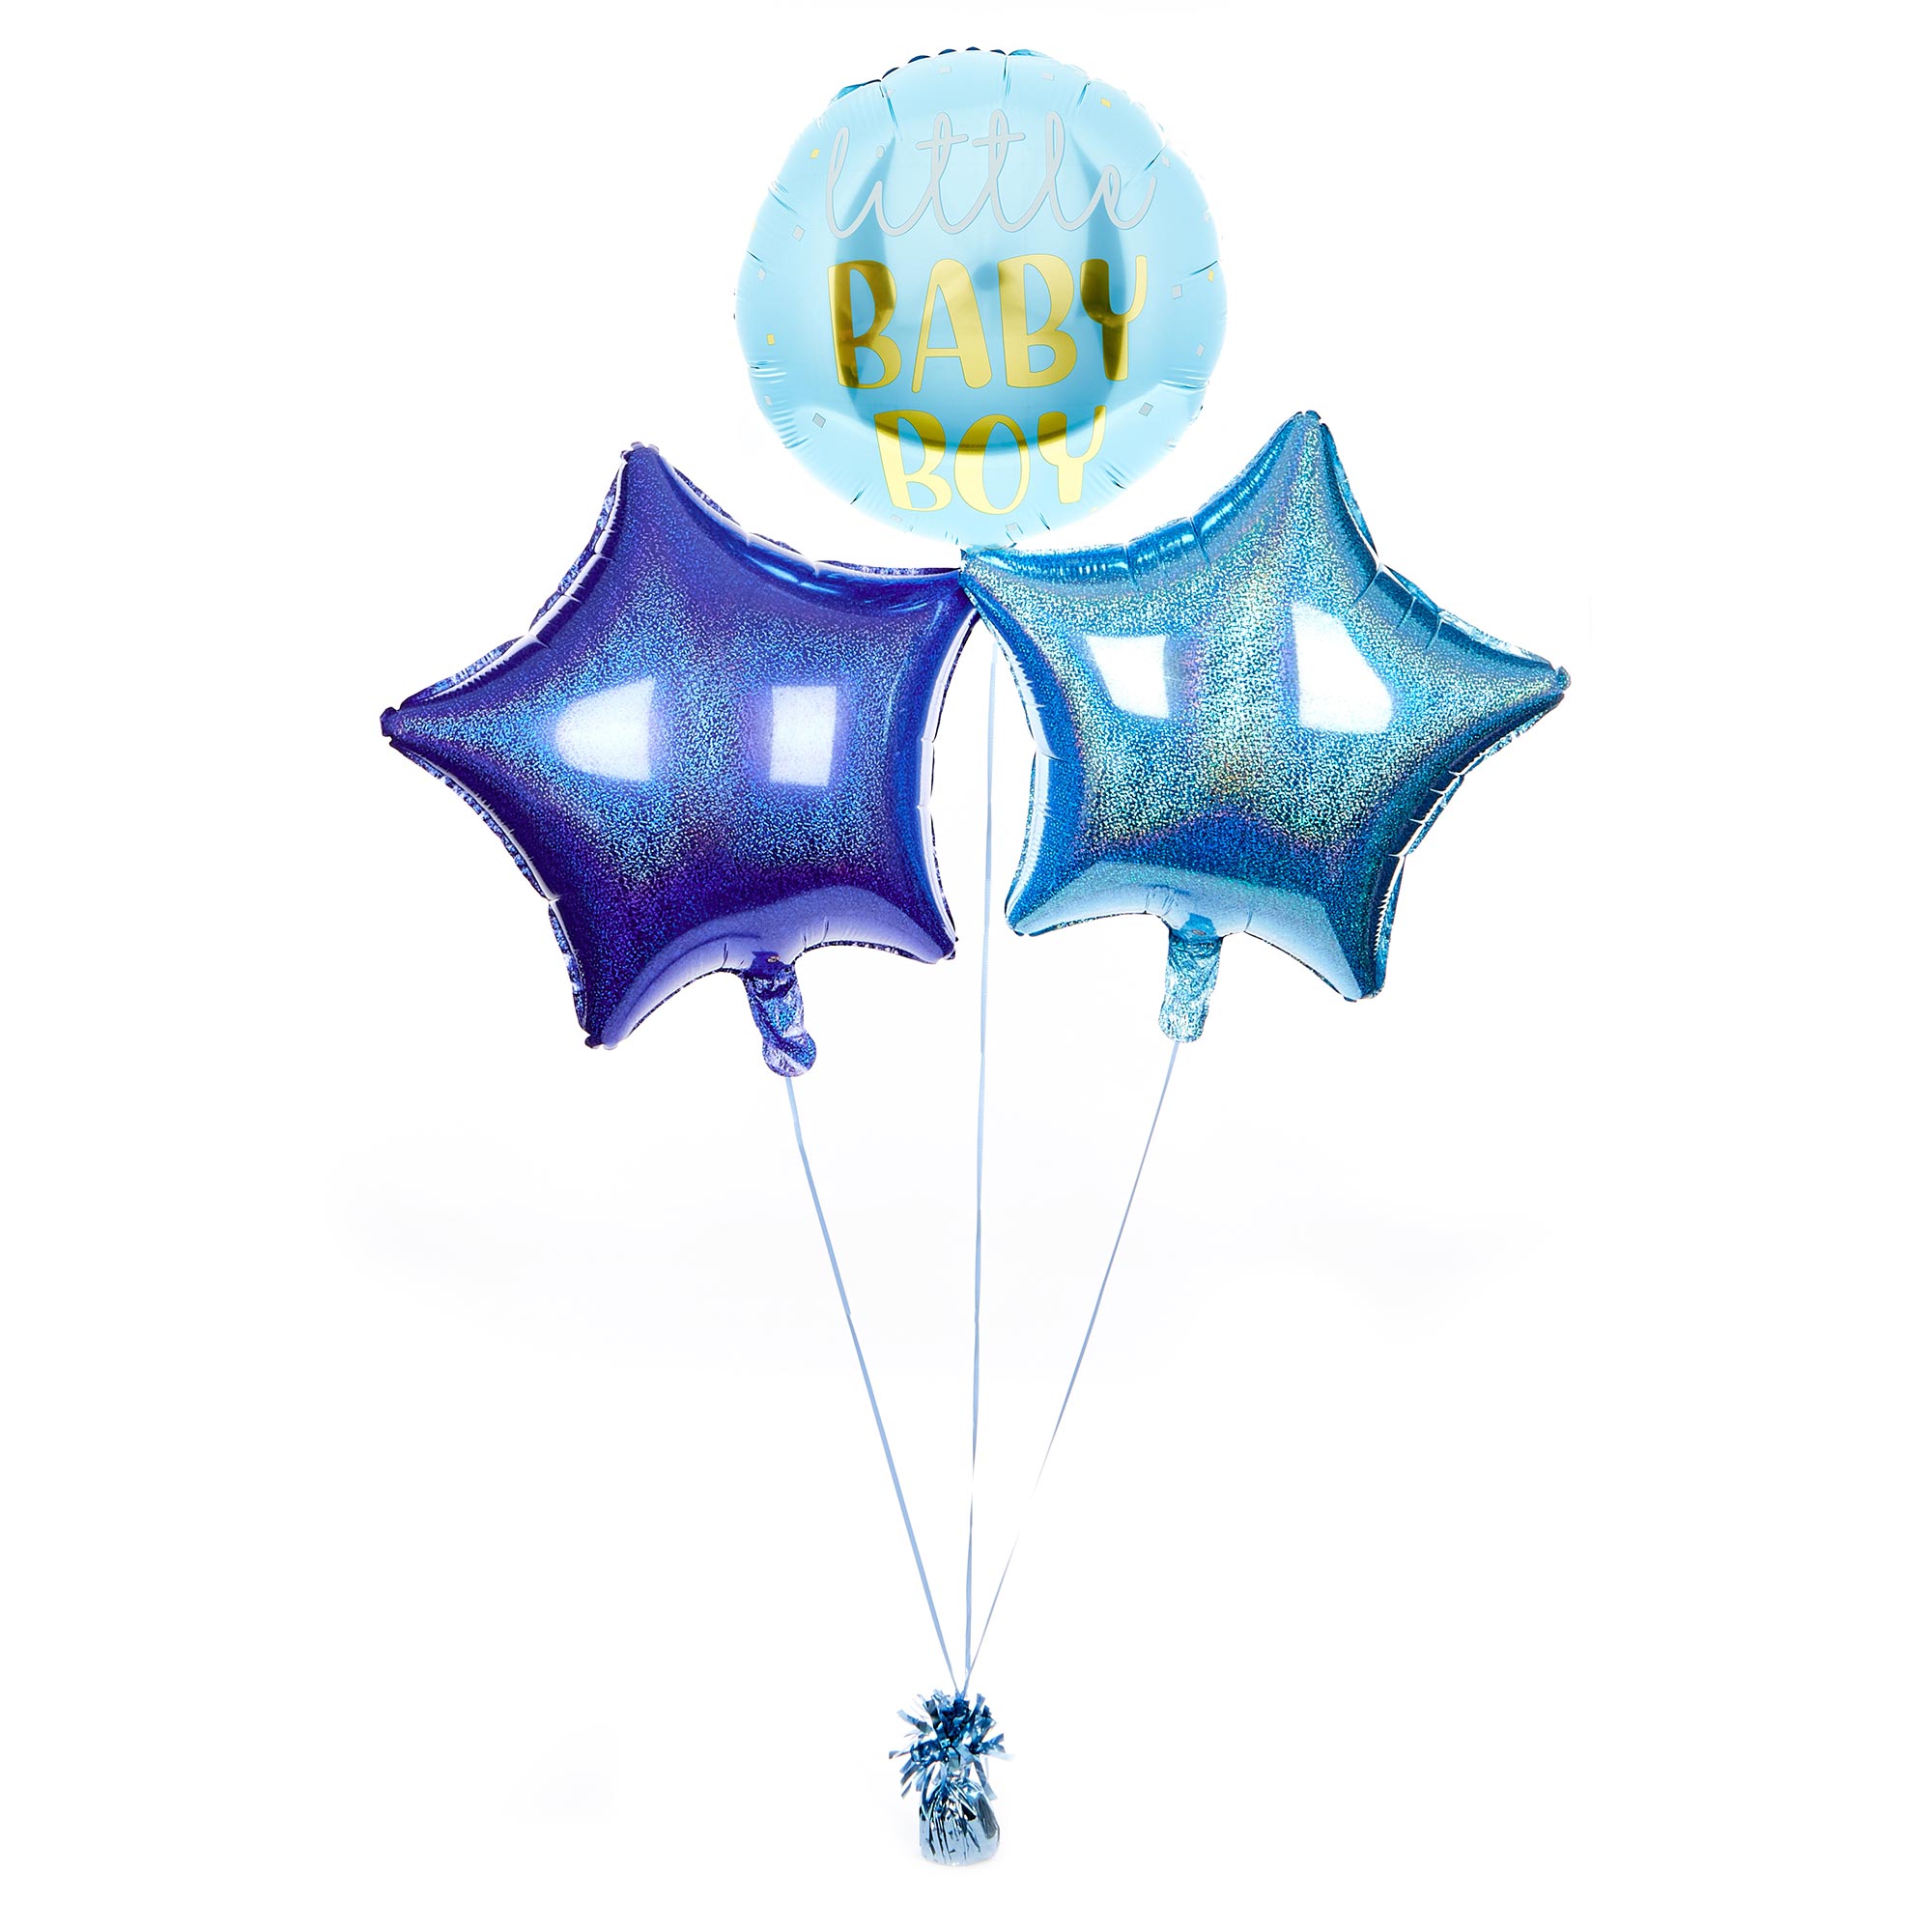 Little Baby Boy Balloon Bouquet - DELIVERED INFLATED!